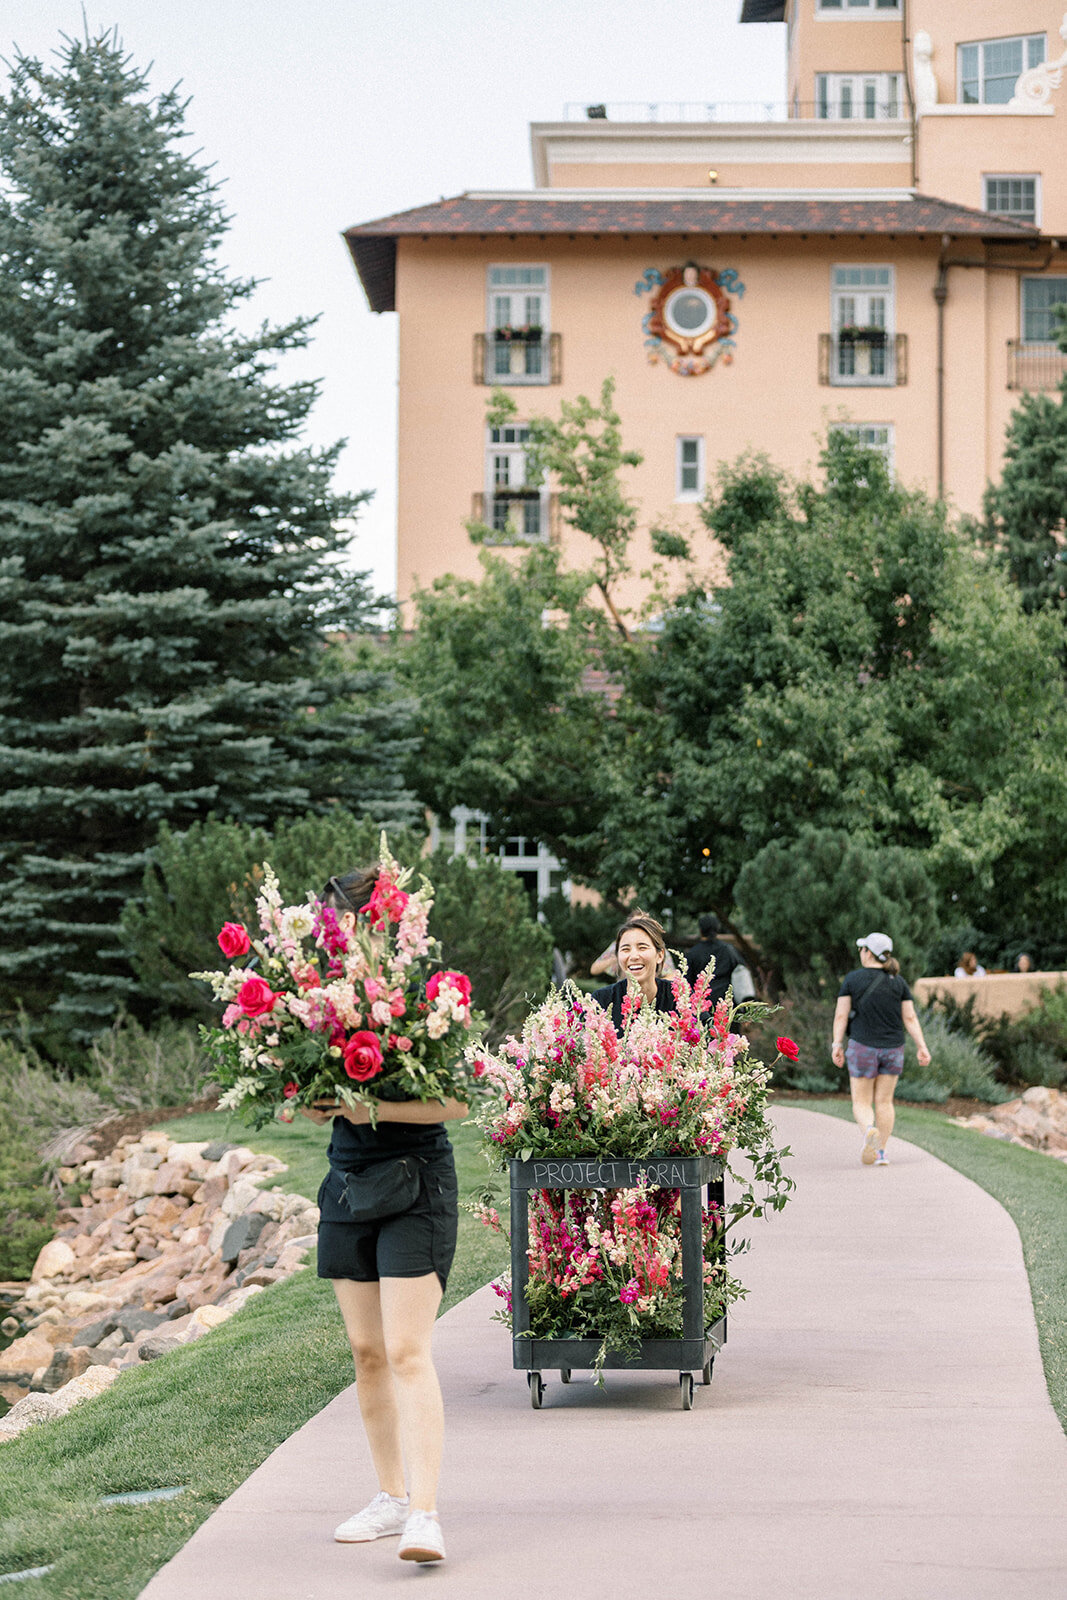 M%2bE_The_Broadmoor_Lakeside_Terrace_Wedding_Vendors_by_Diana_Coulter-3